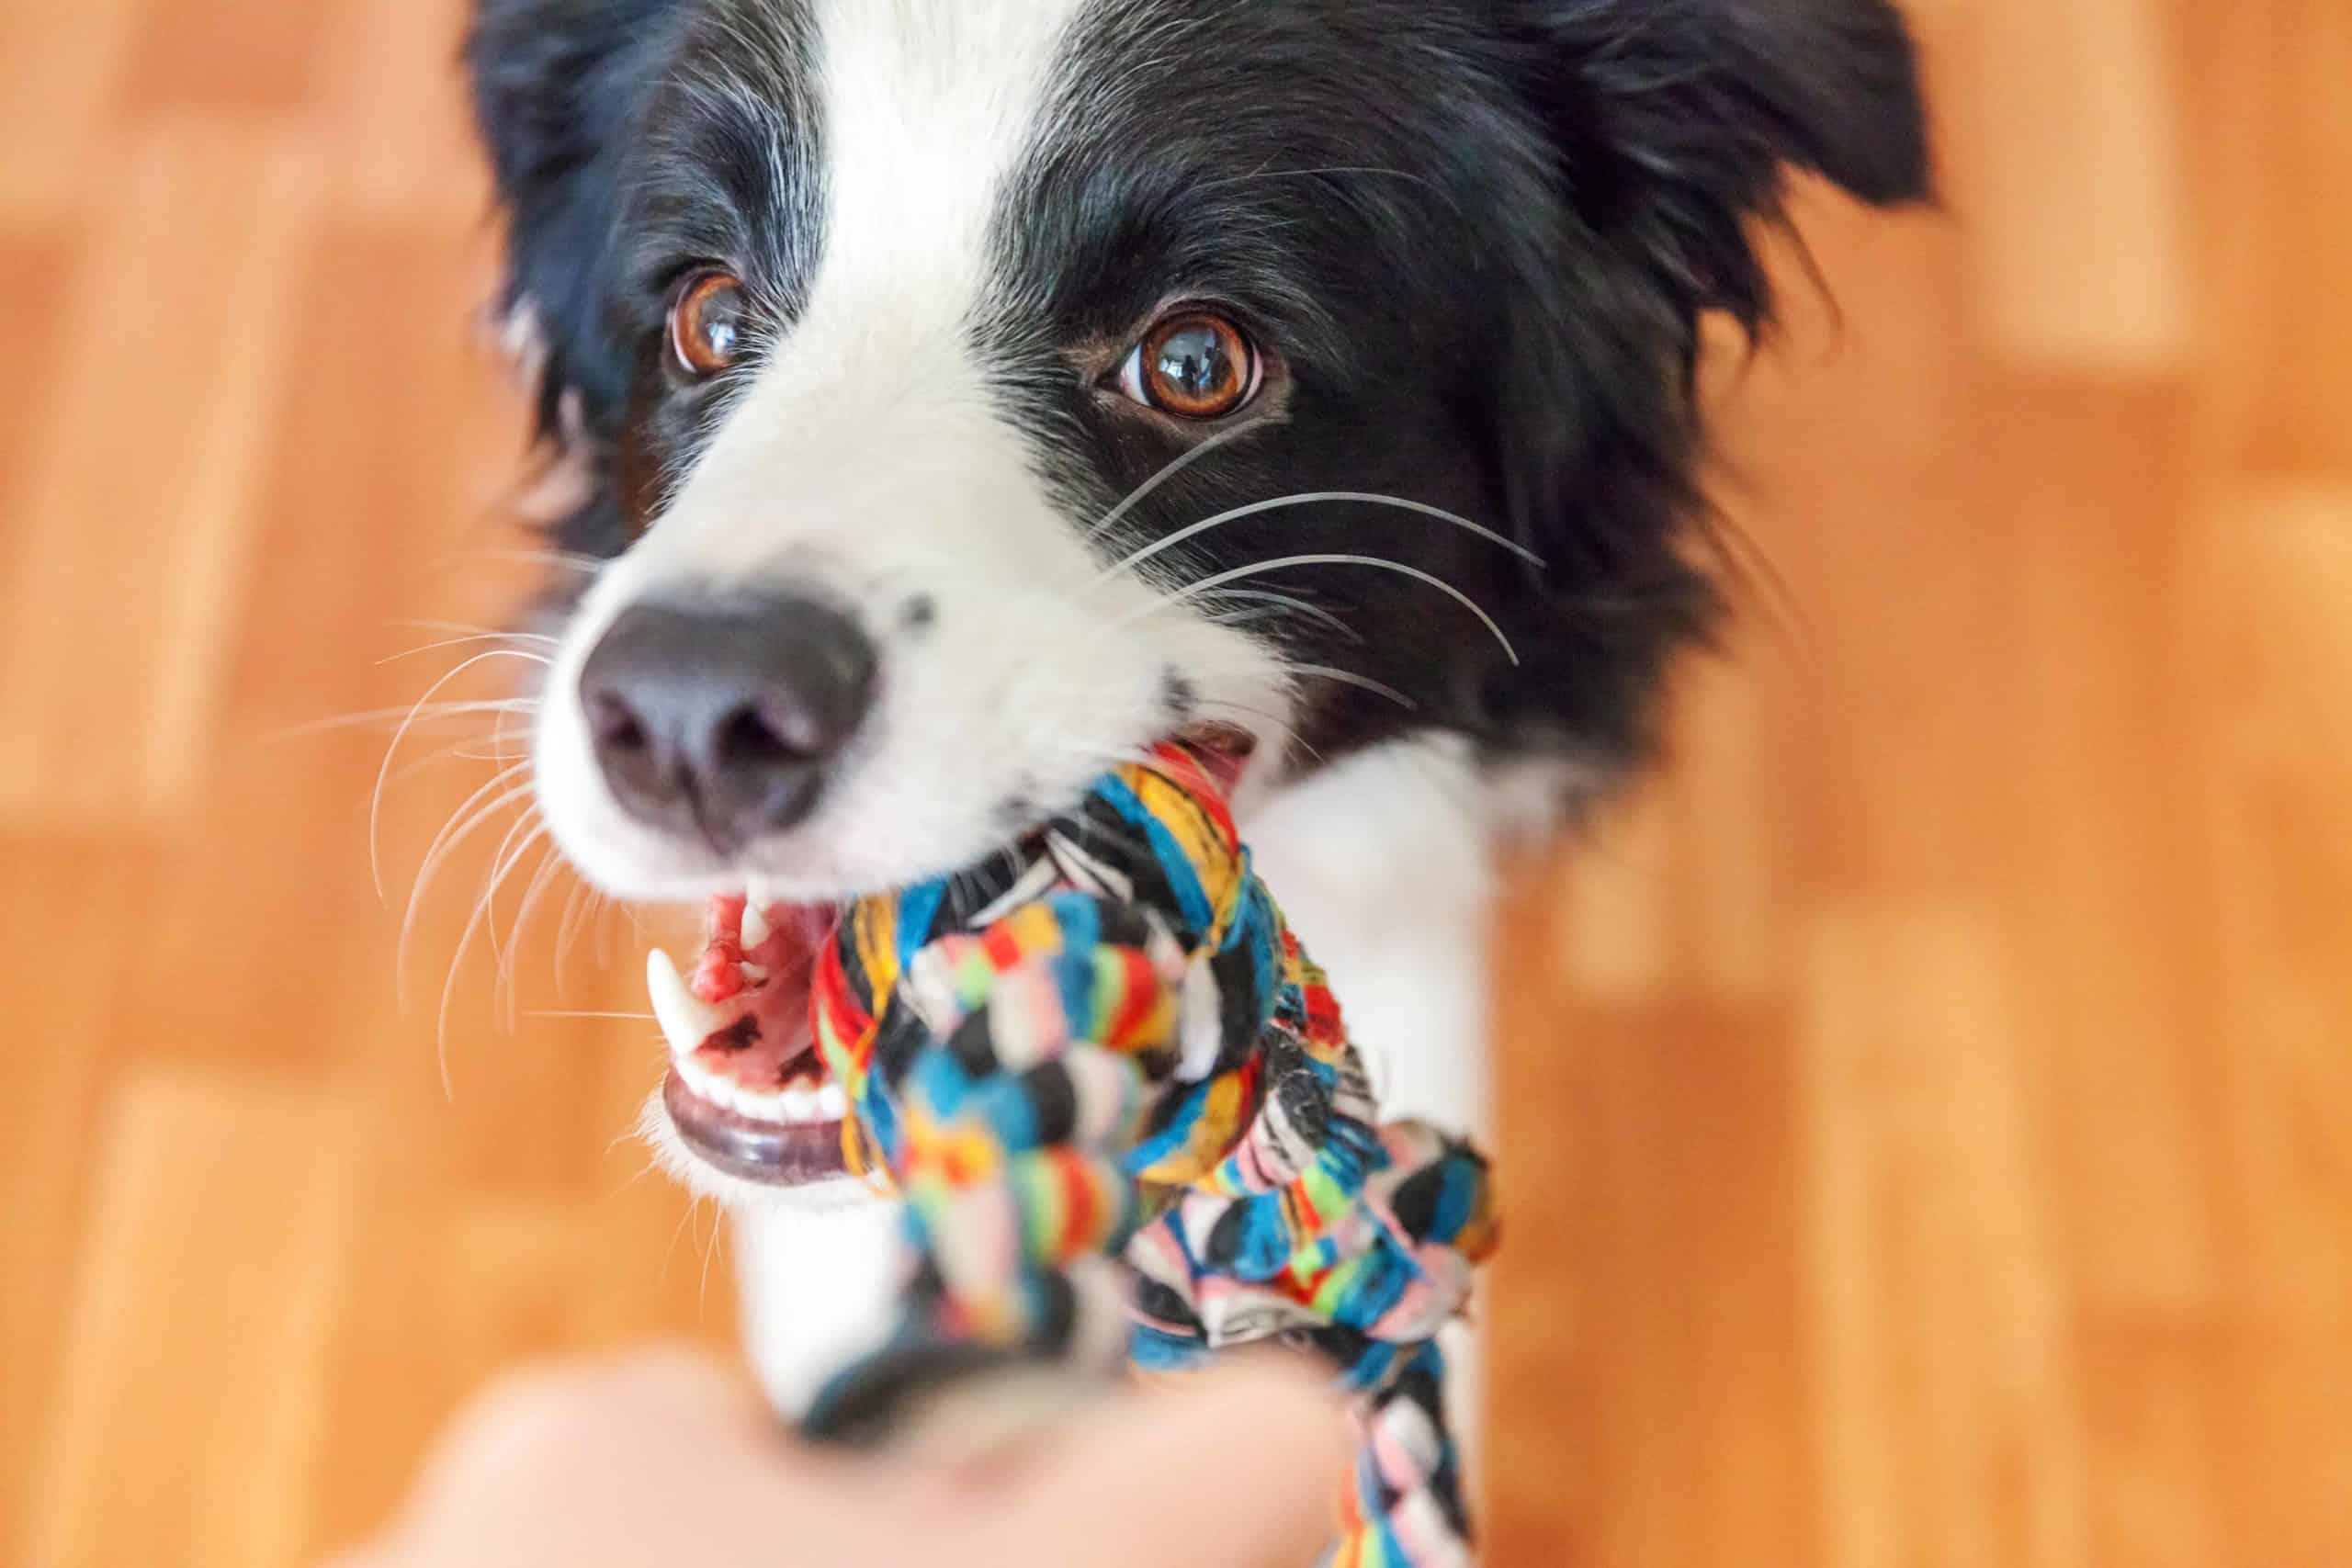 Border collie puppy bites on rope toy. Teach your puppy not to bite while playing while the dog is young. Encourage your puppy to play with toys and reward him for doing just that.